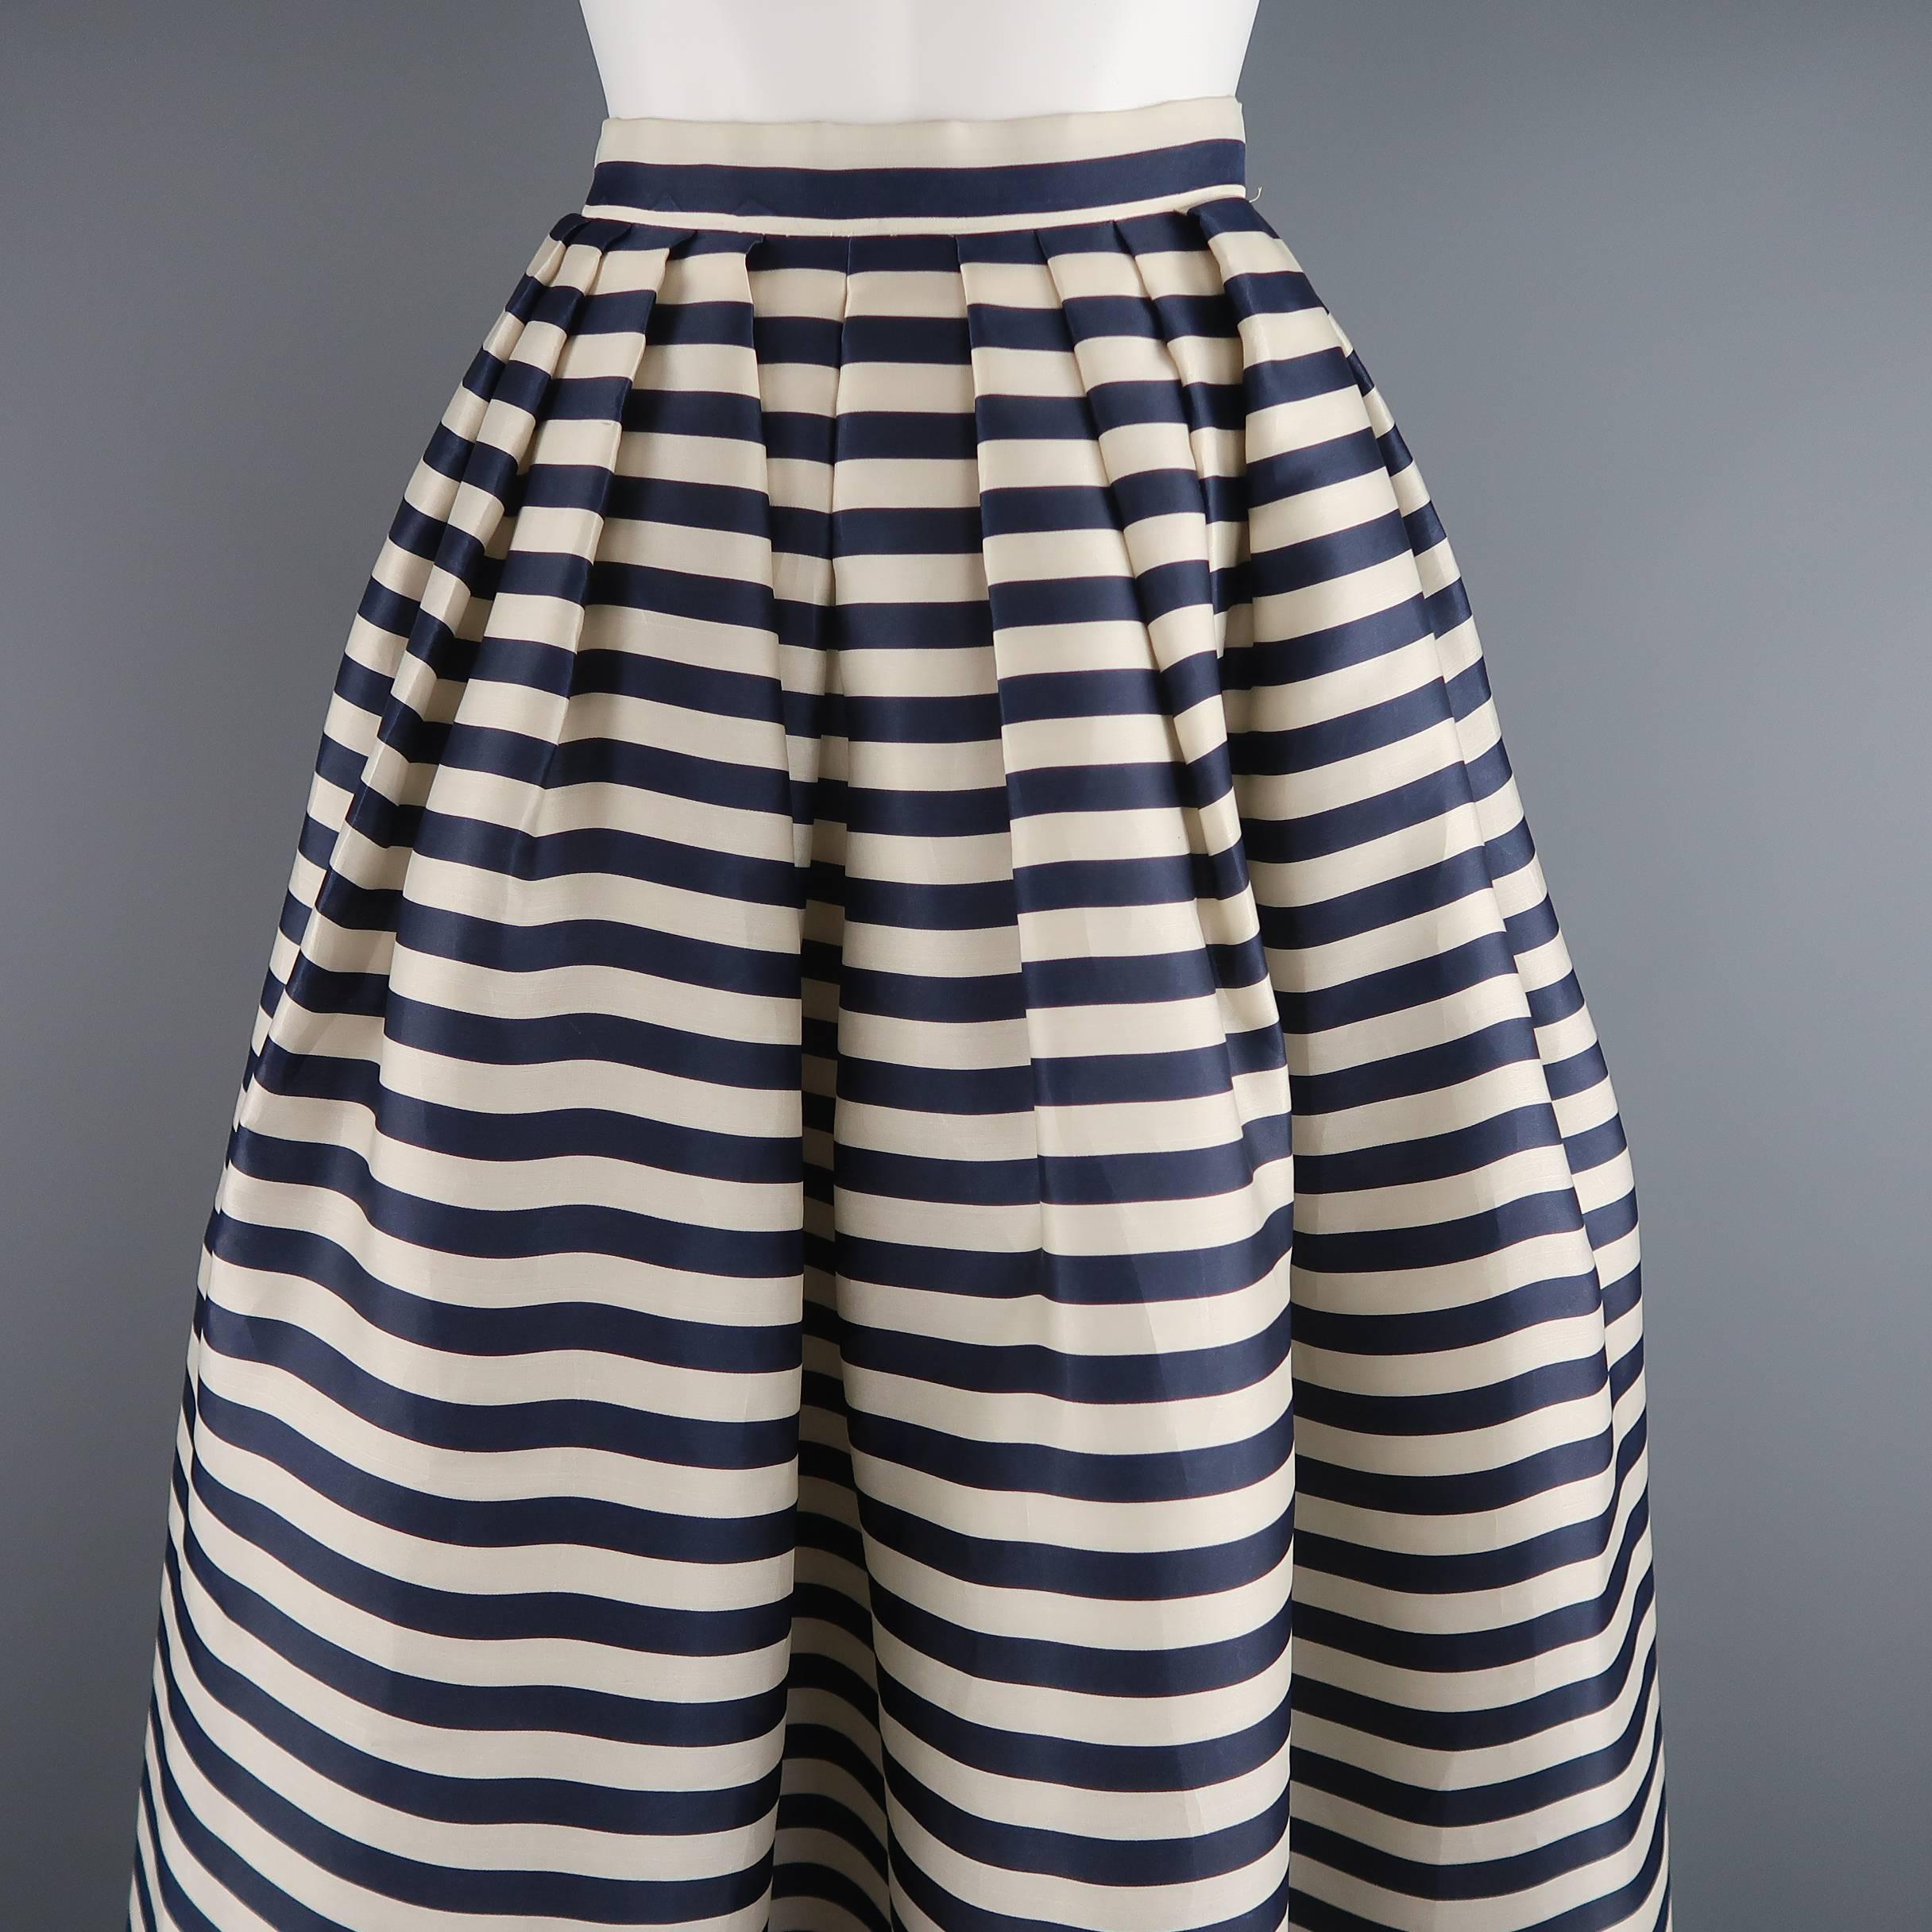 Gorgeous OSCAR DE LA RENTA ball skirt comes in a light cream beige and navy blue striped silk satin and features a high rise, pleated top, and layered tulle ruffle structure liner. Spots throughout. As-is. Made in USA.
 
Good Pre-Owned